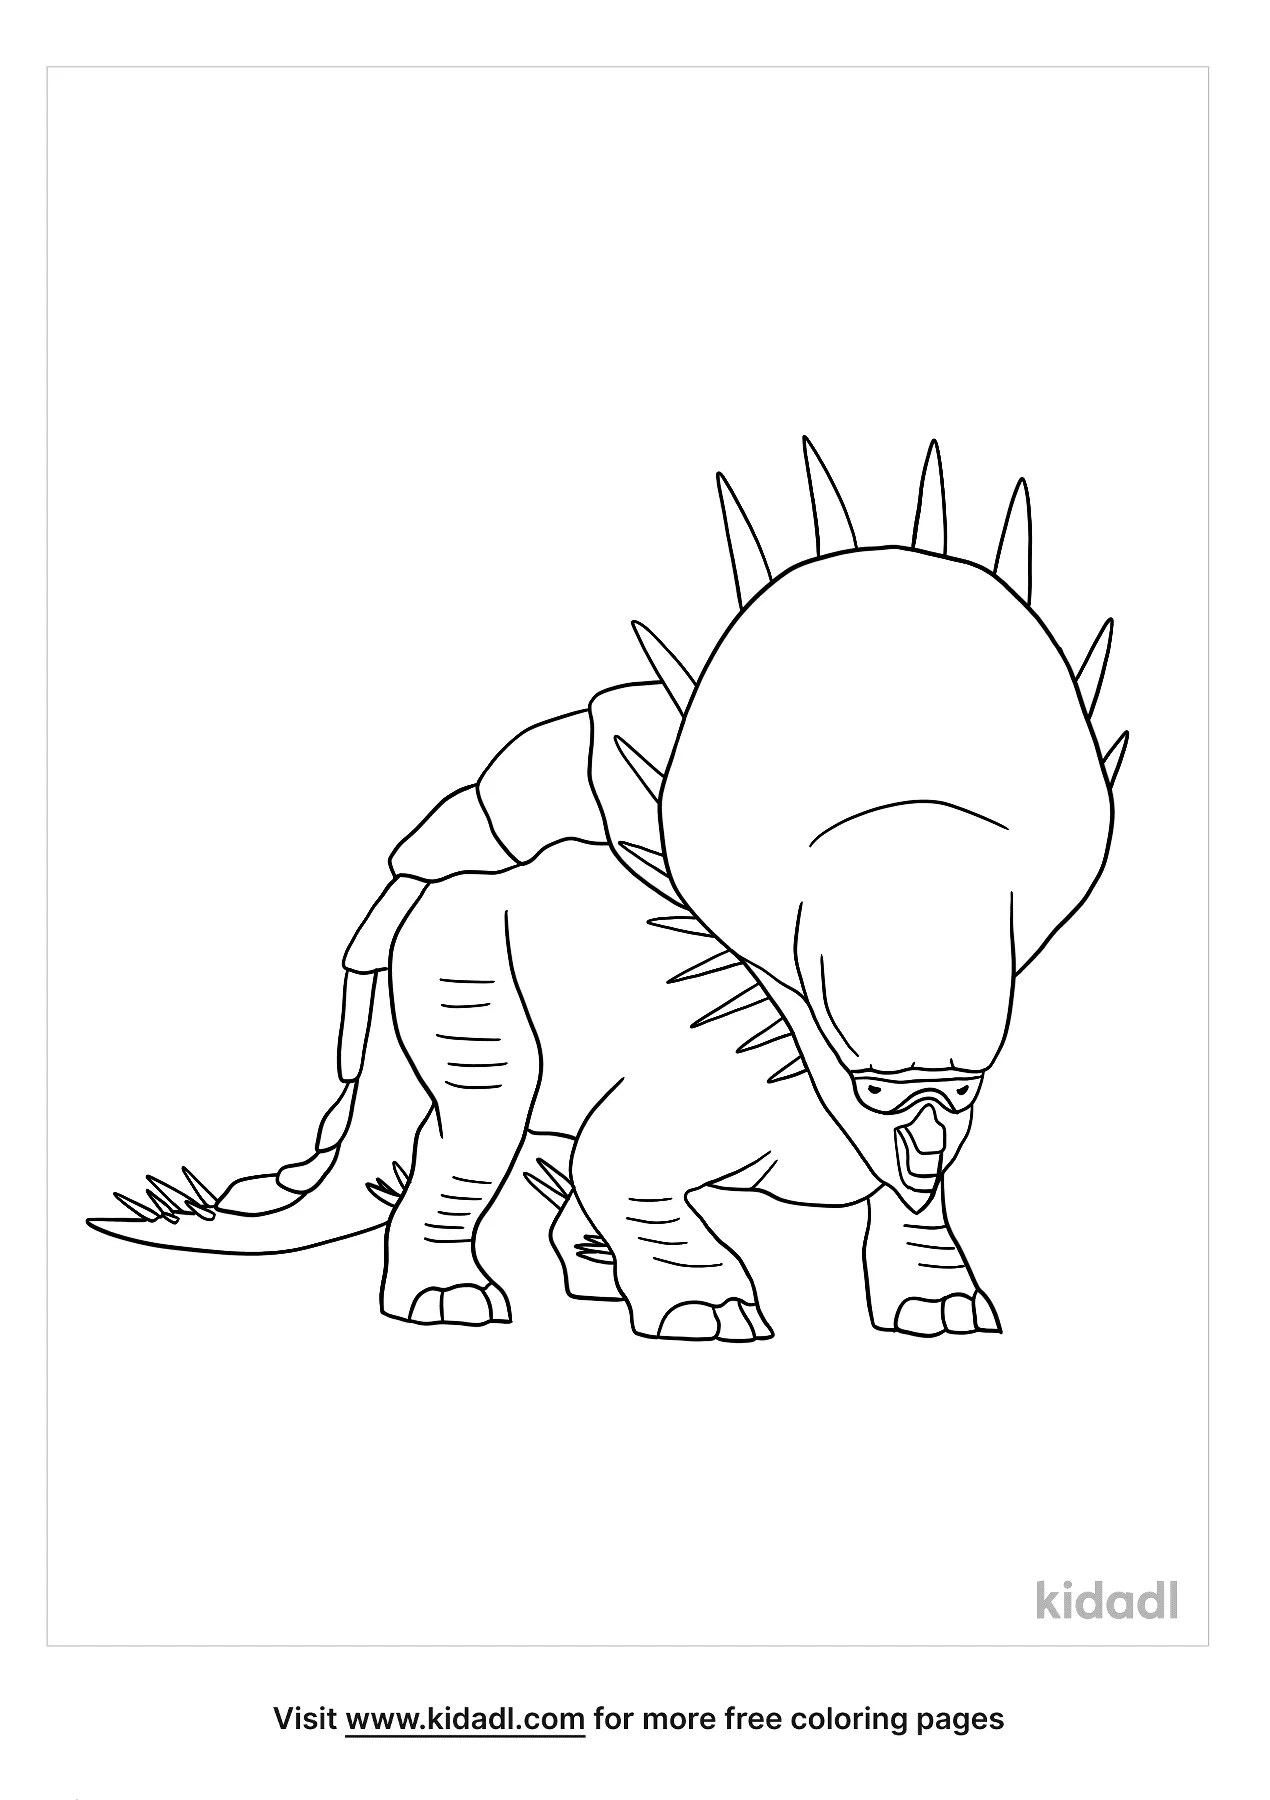 Pachyceratops Coloring Page